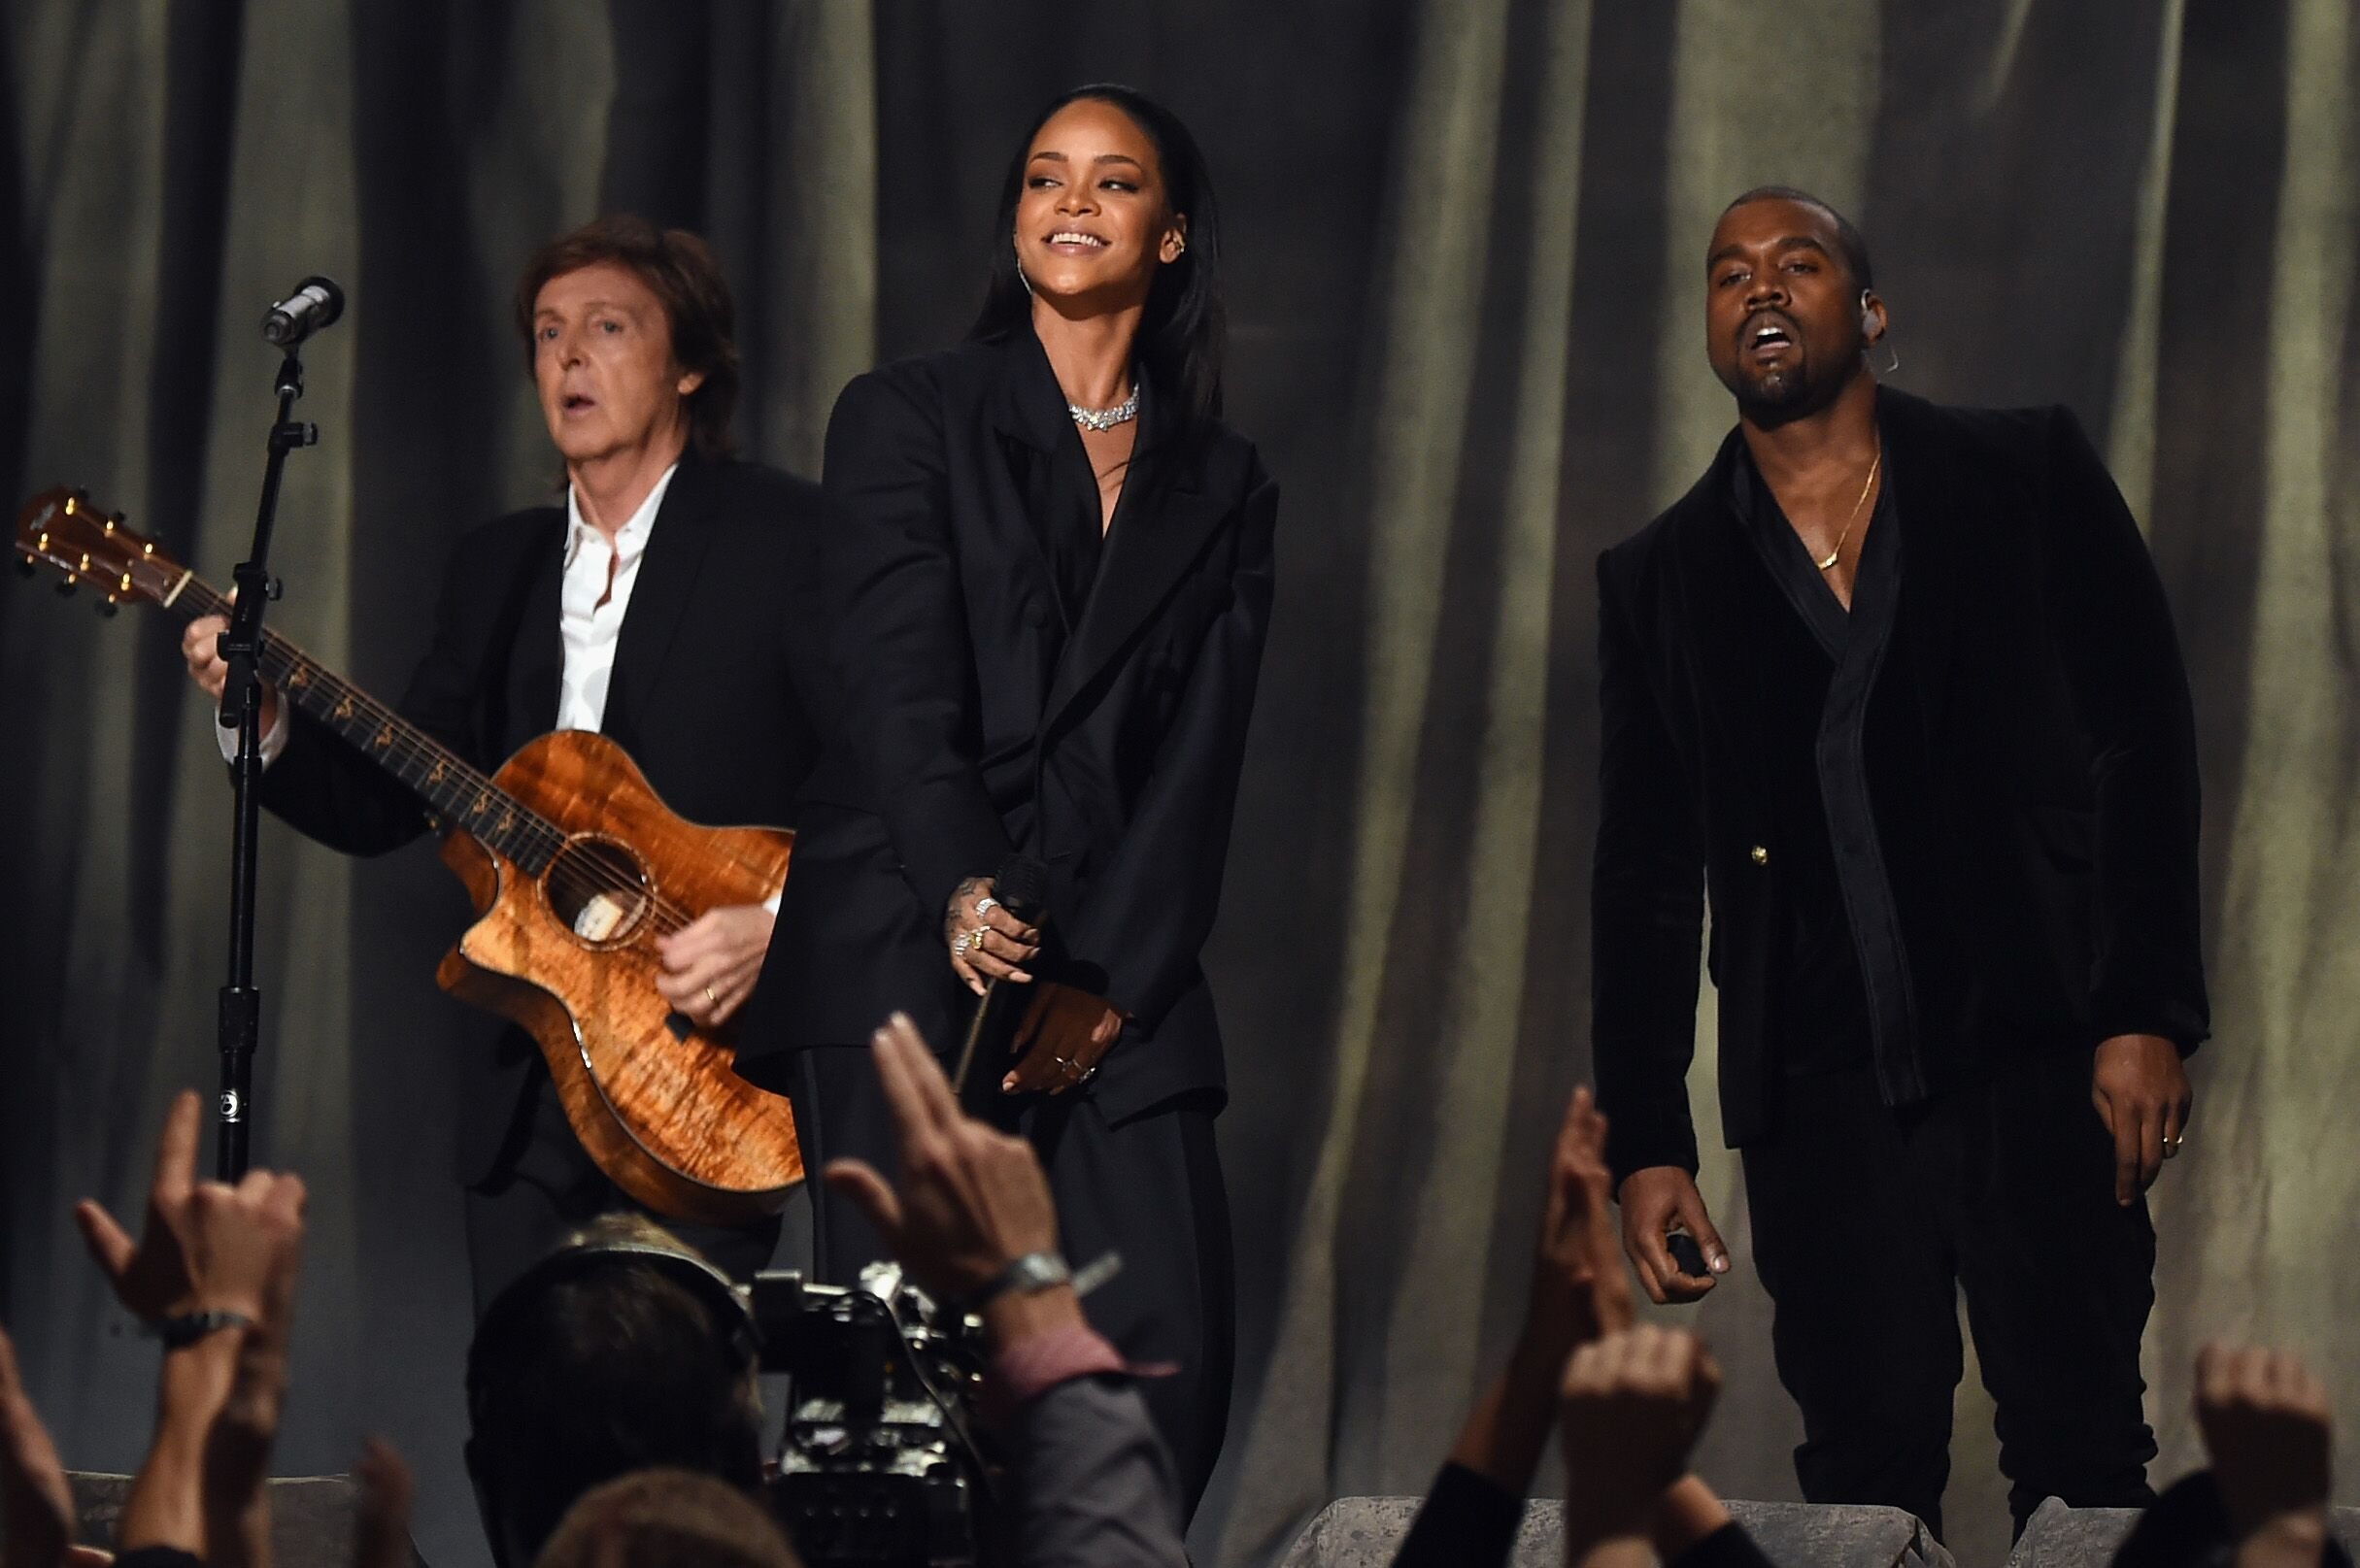 Paul McCartney, Rihanna and Kanye West performing their collaboration "FourFiveSeconds" | Source: Getty Images/GlobalImagesUkraine